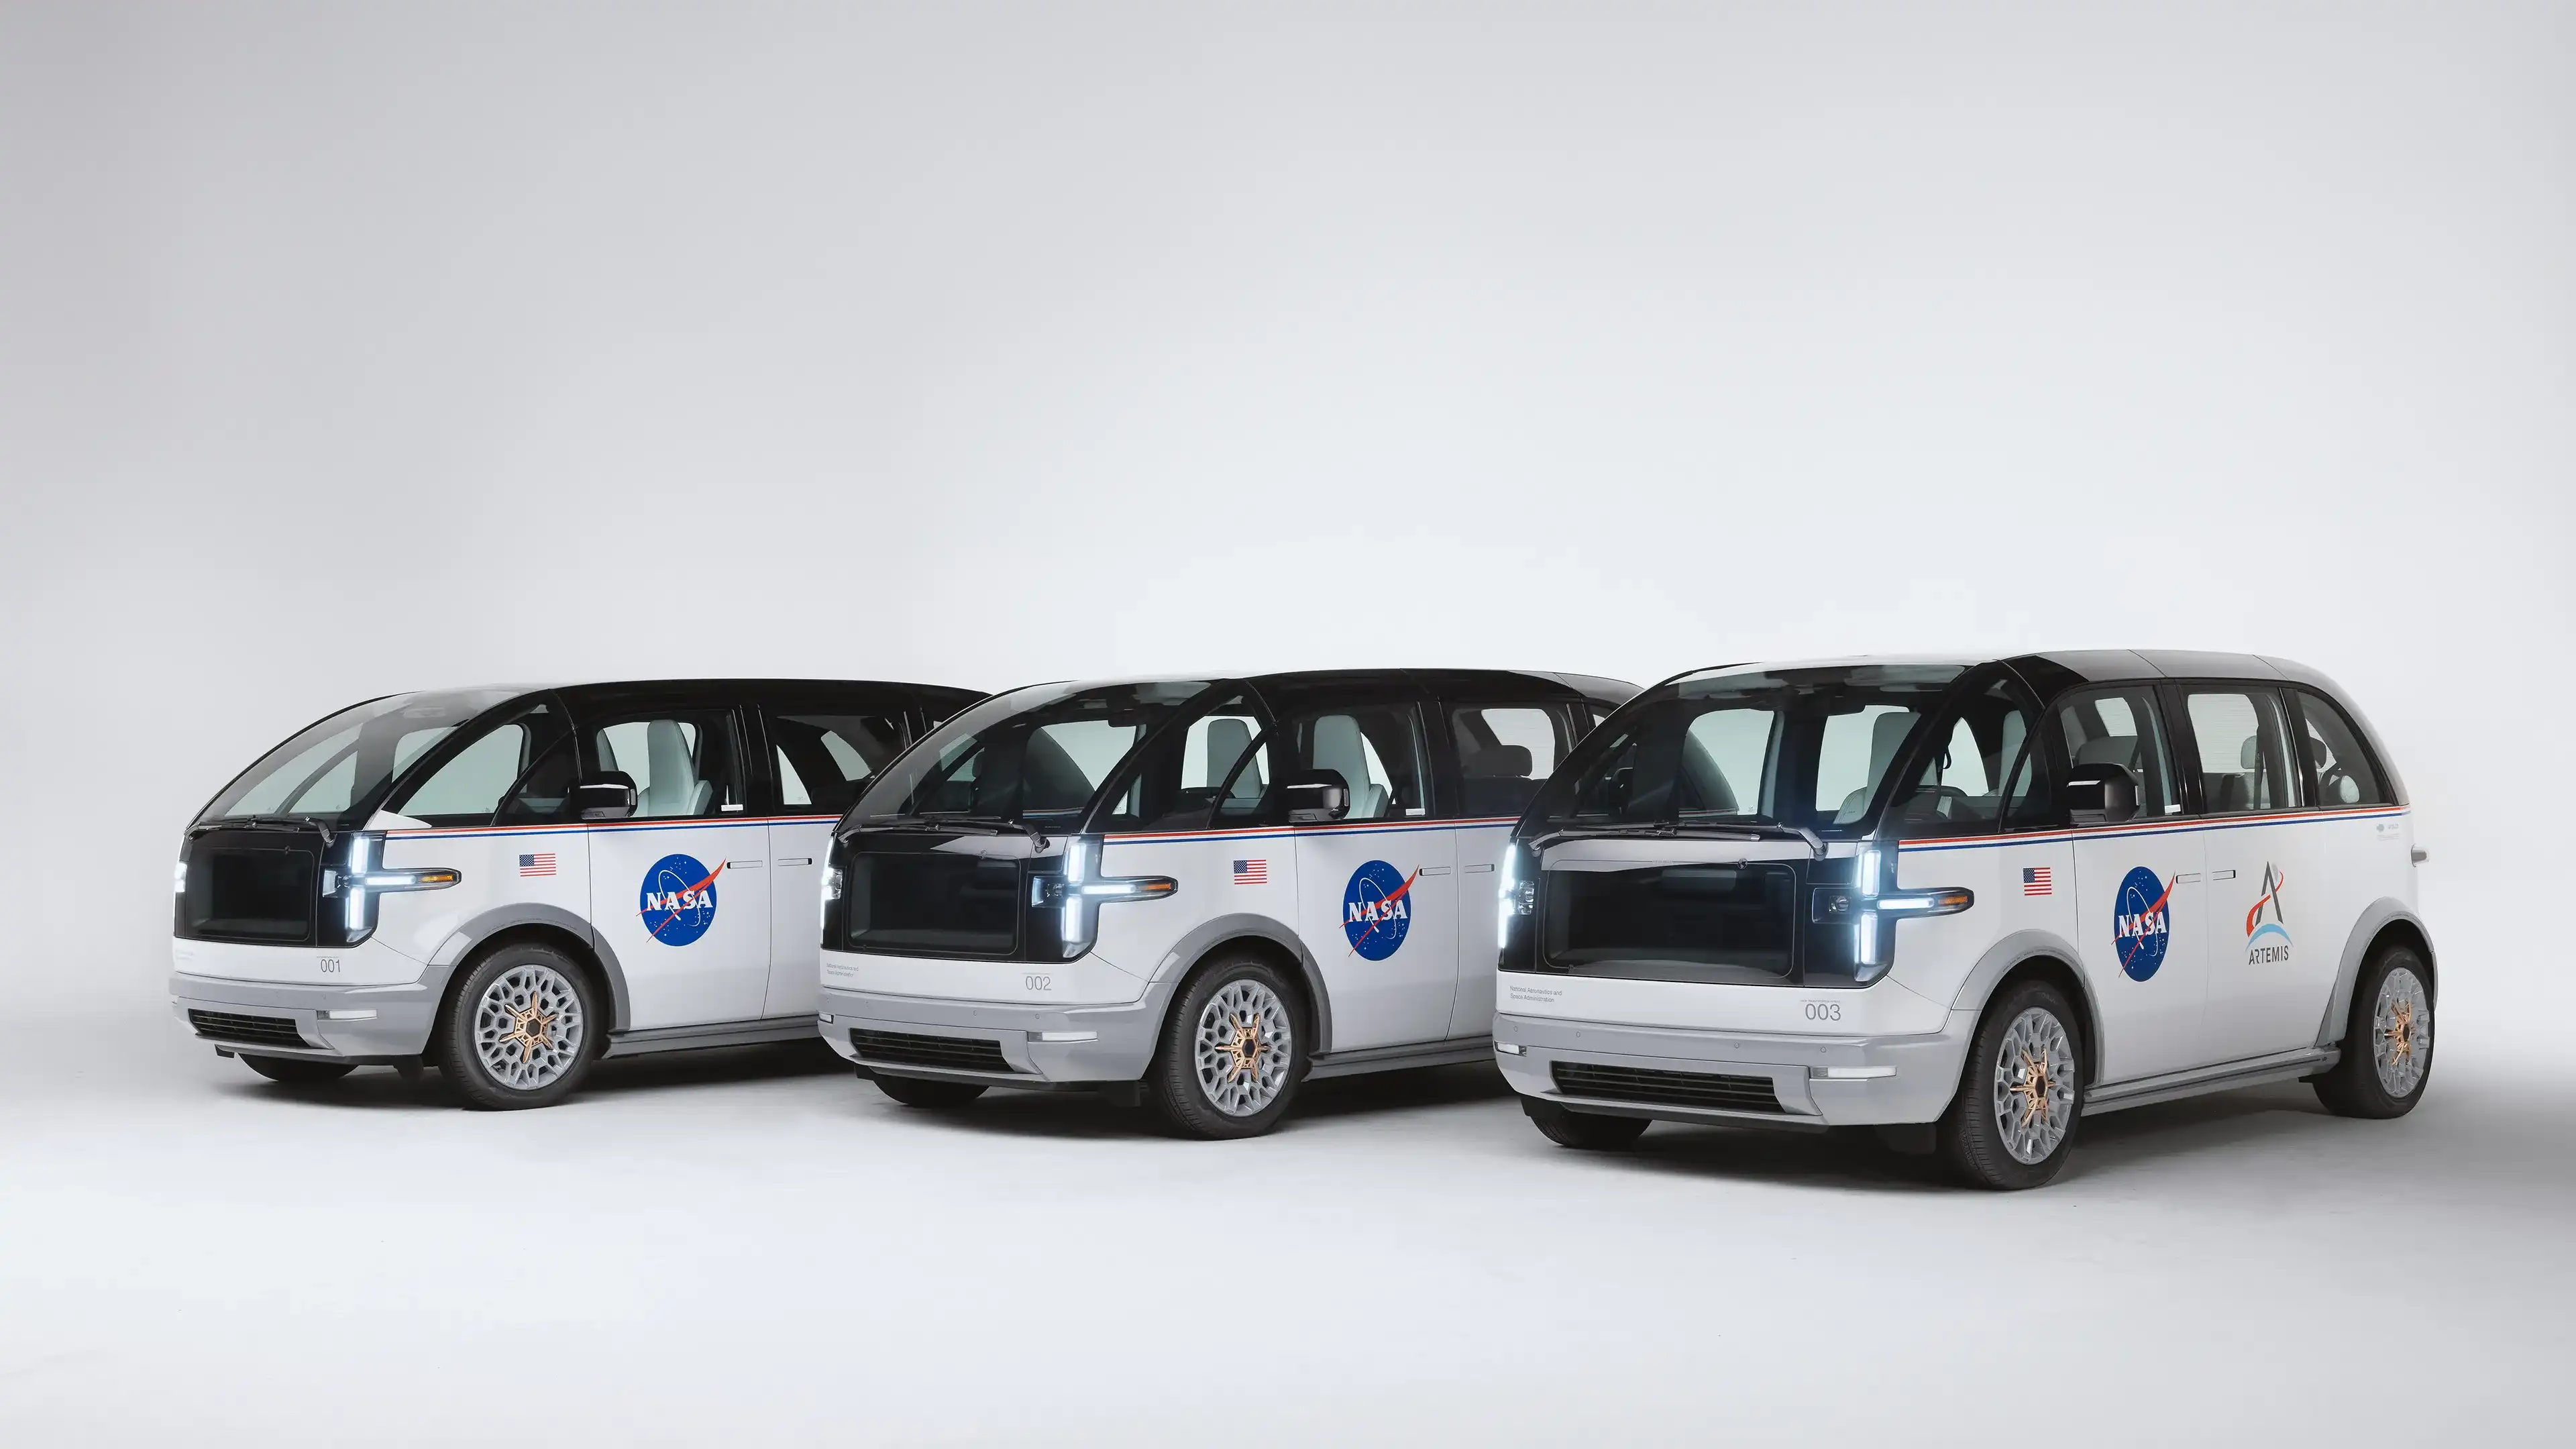 Canoo Delivers Crew Transportation Vehicles to NASA for Artemis Missions | Canoo